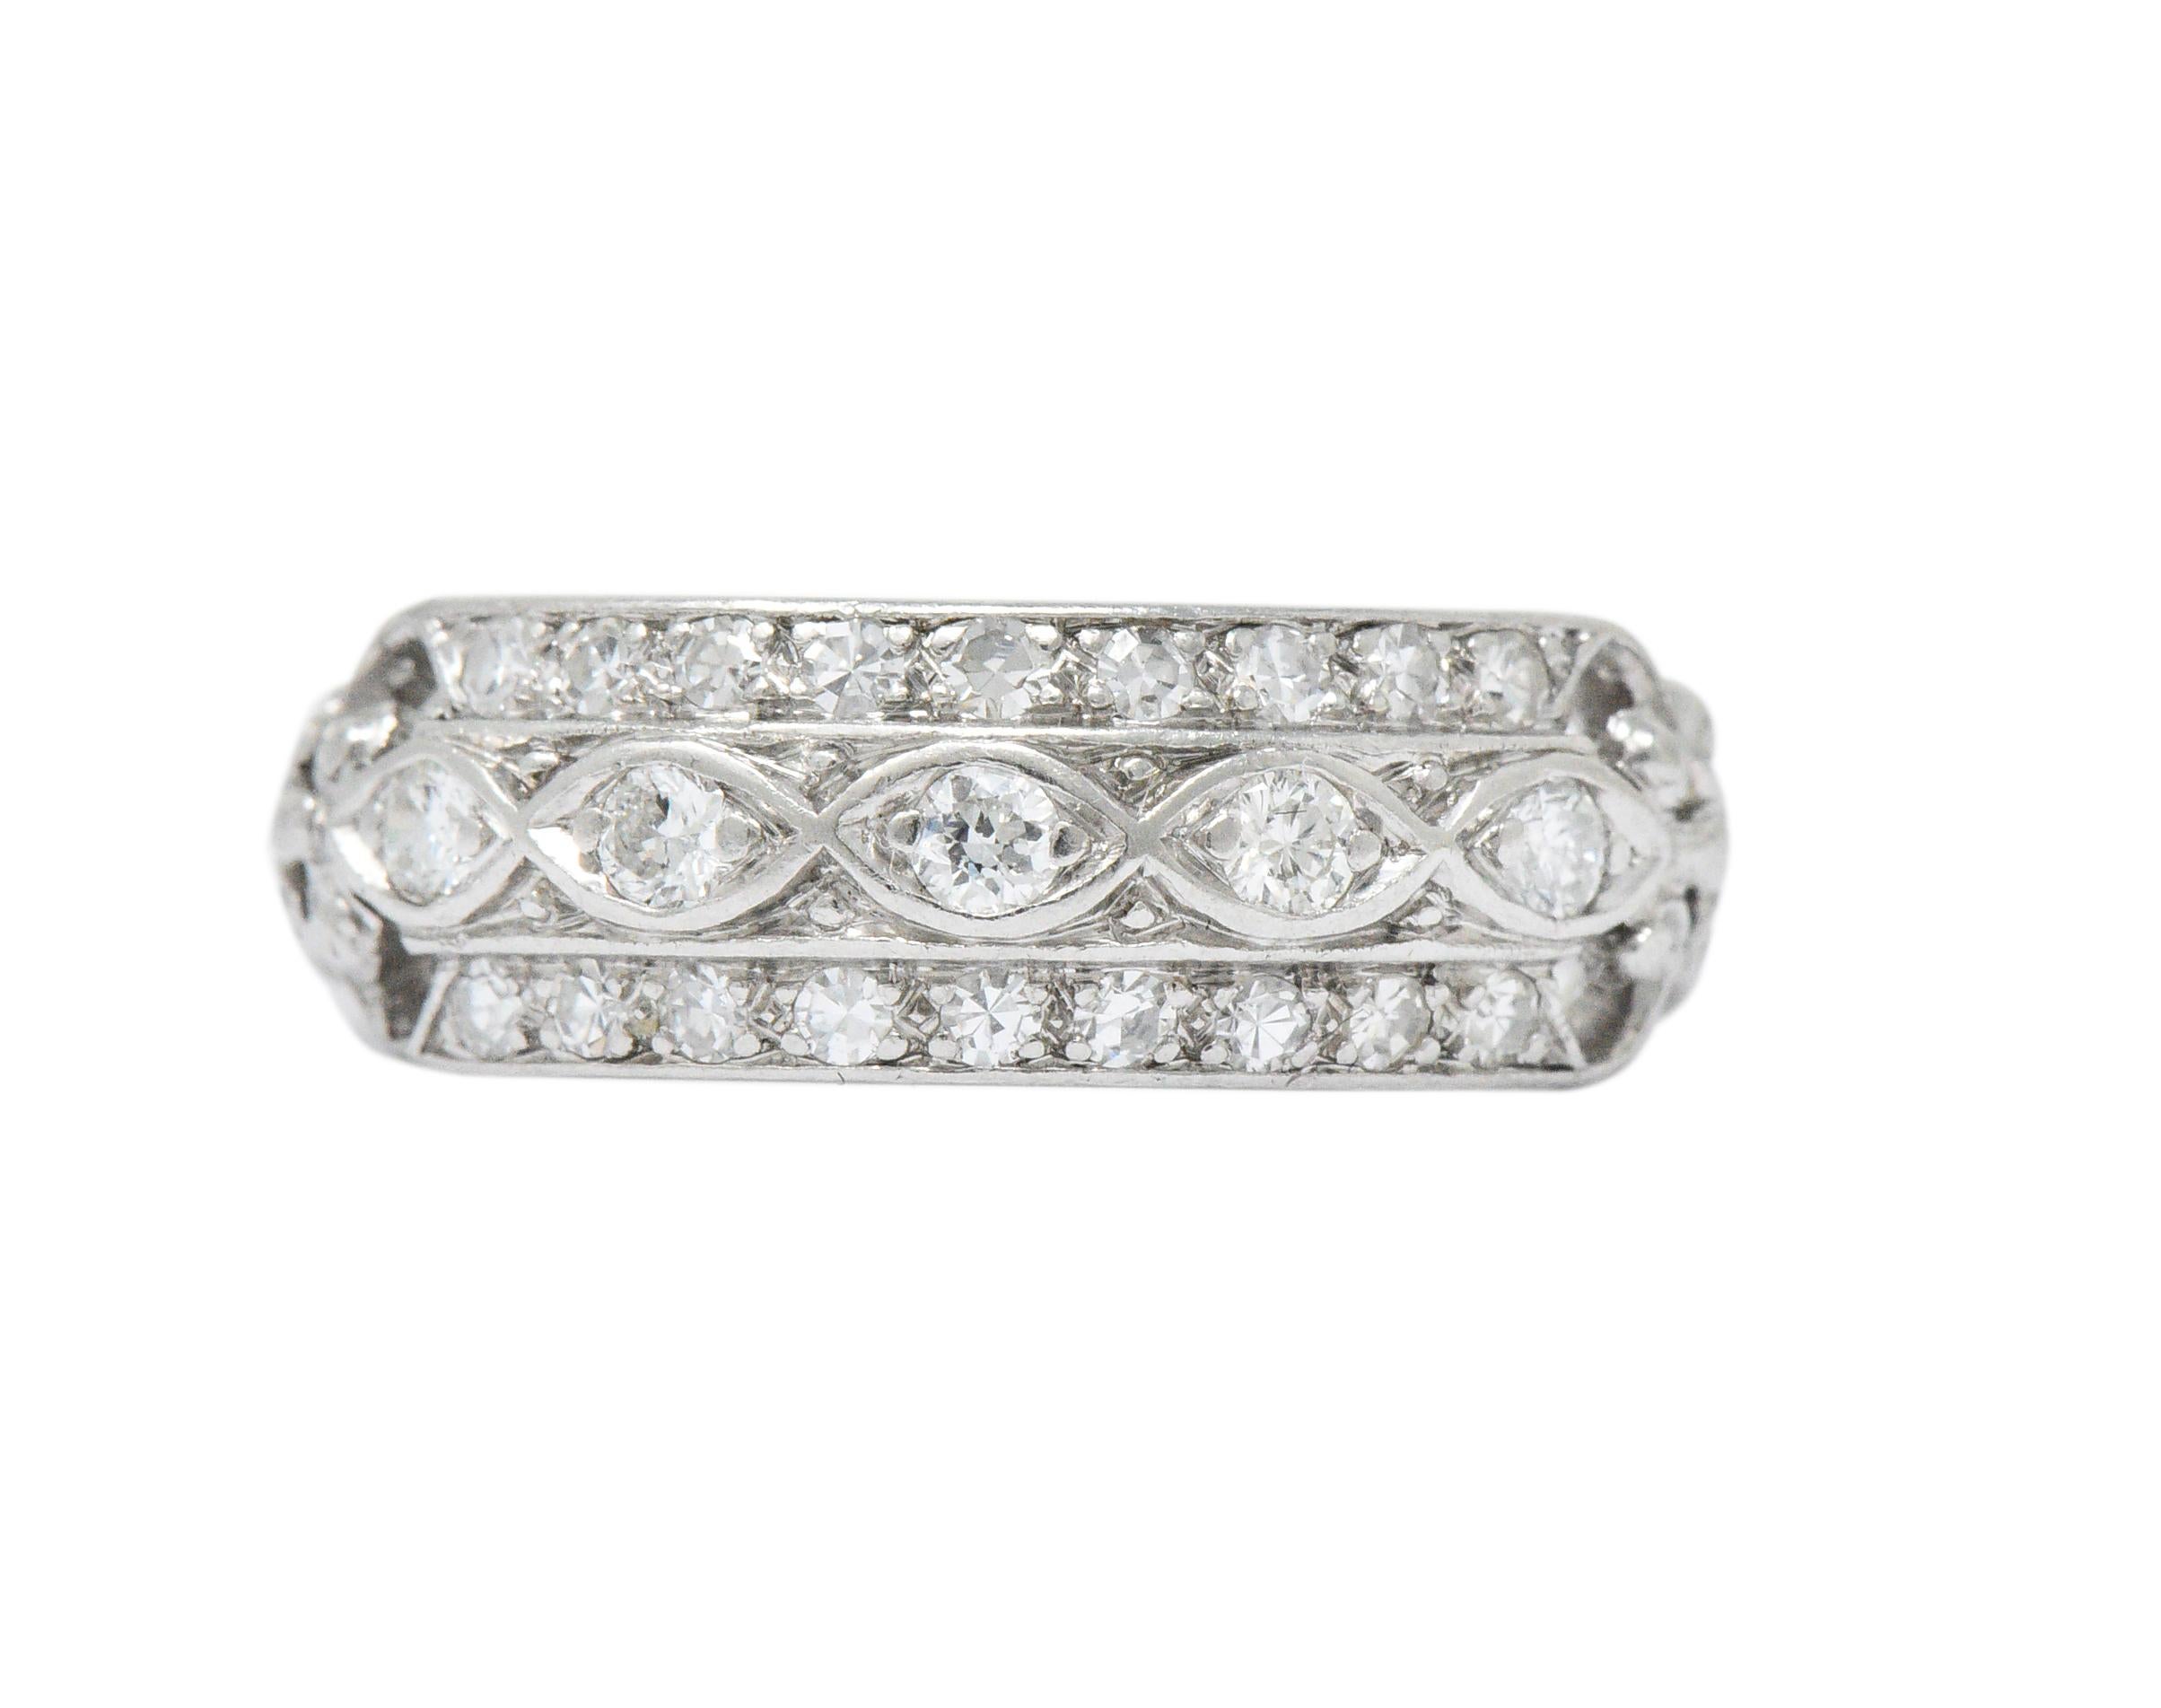 Set to the front with five full cut diamonds weighing approximately 0.15 carat total

Accented with eighteen single cut diamonds weighing approximately 0.30 carat total

Diamonds are F/G color and VS clarity

Lovely scrolling and weaving